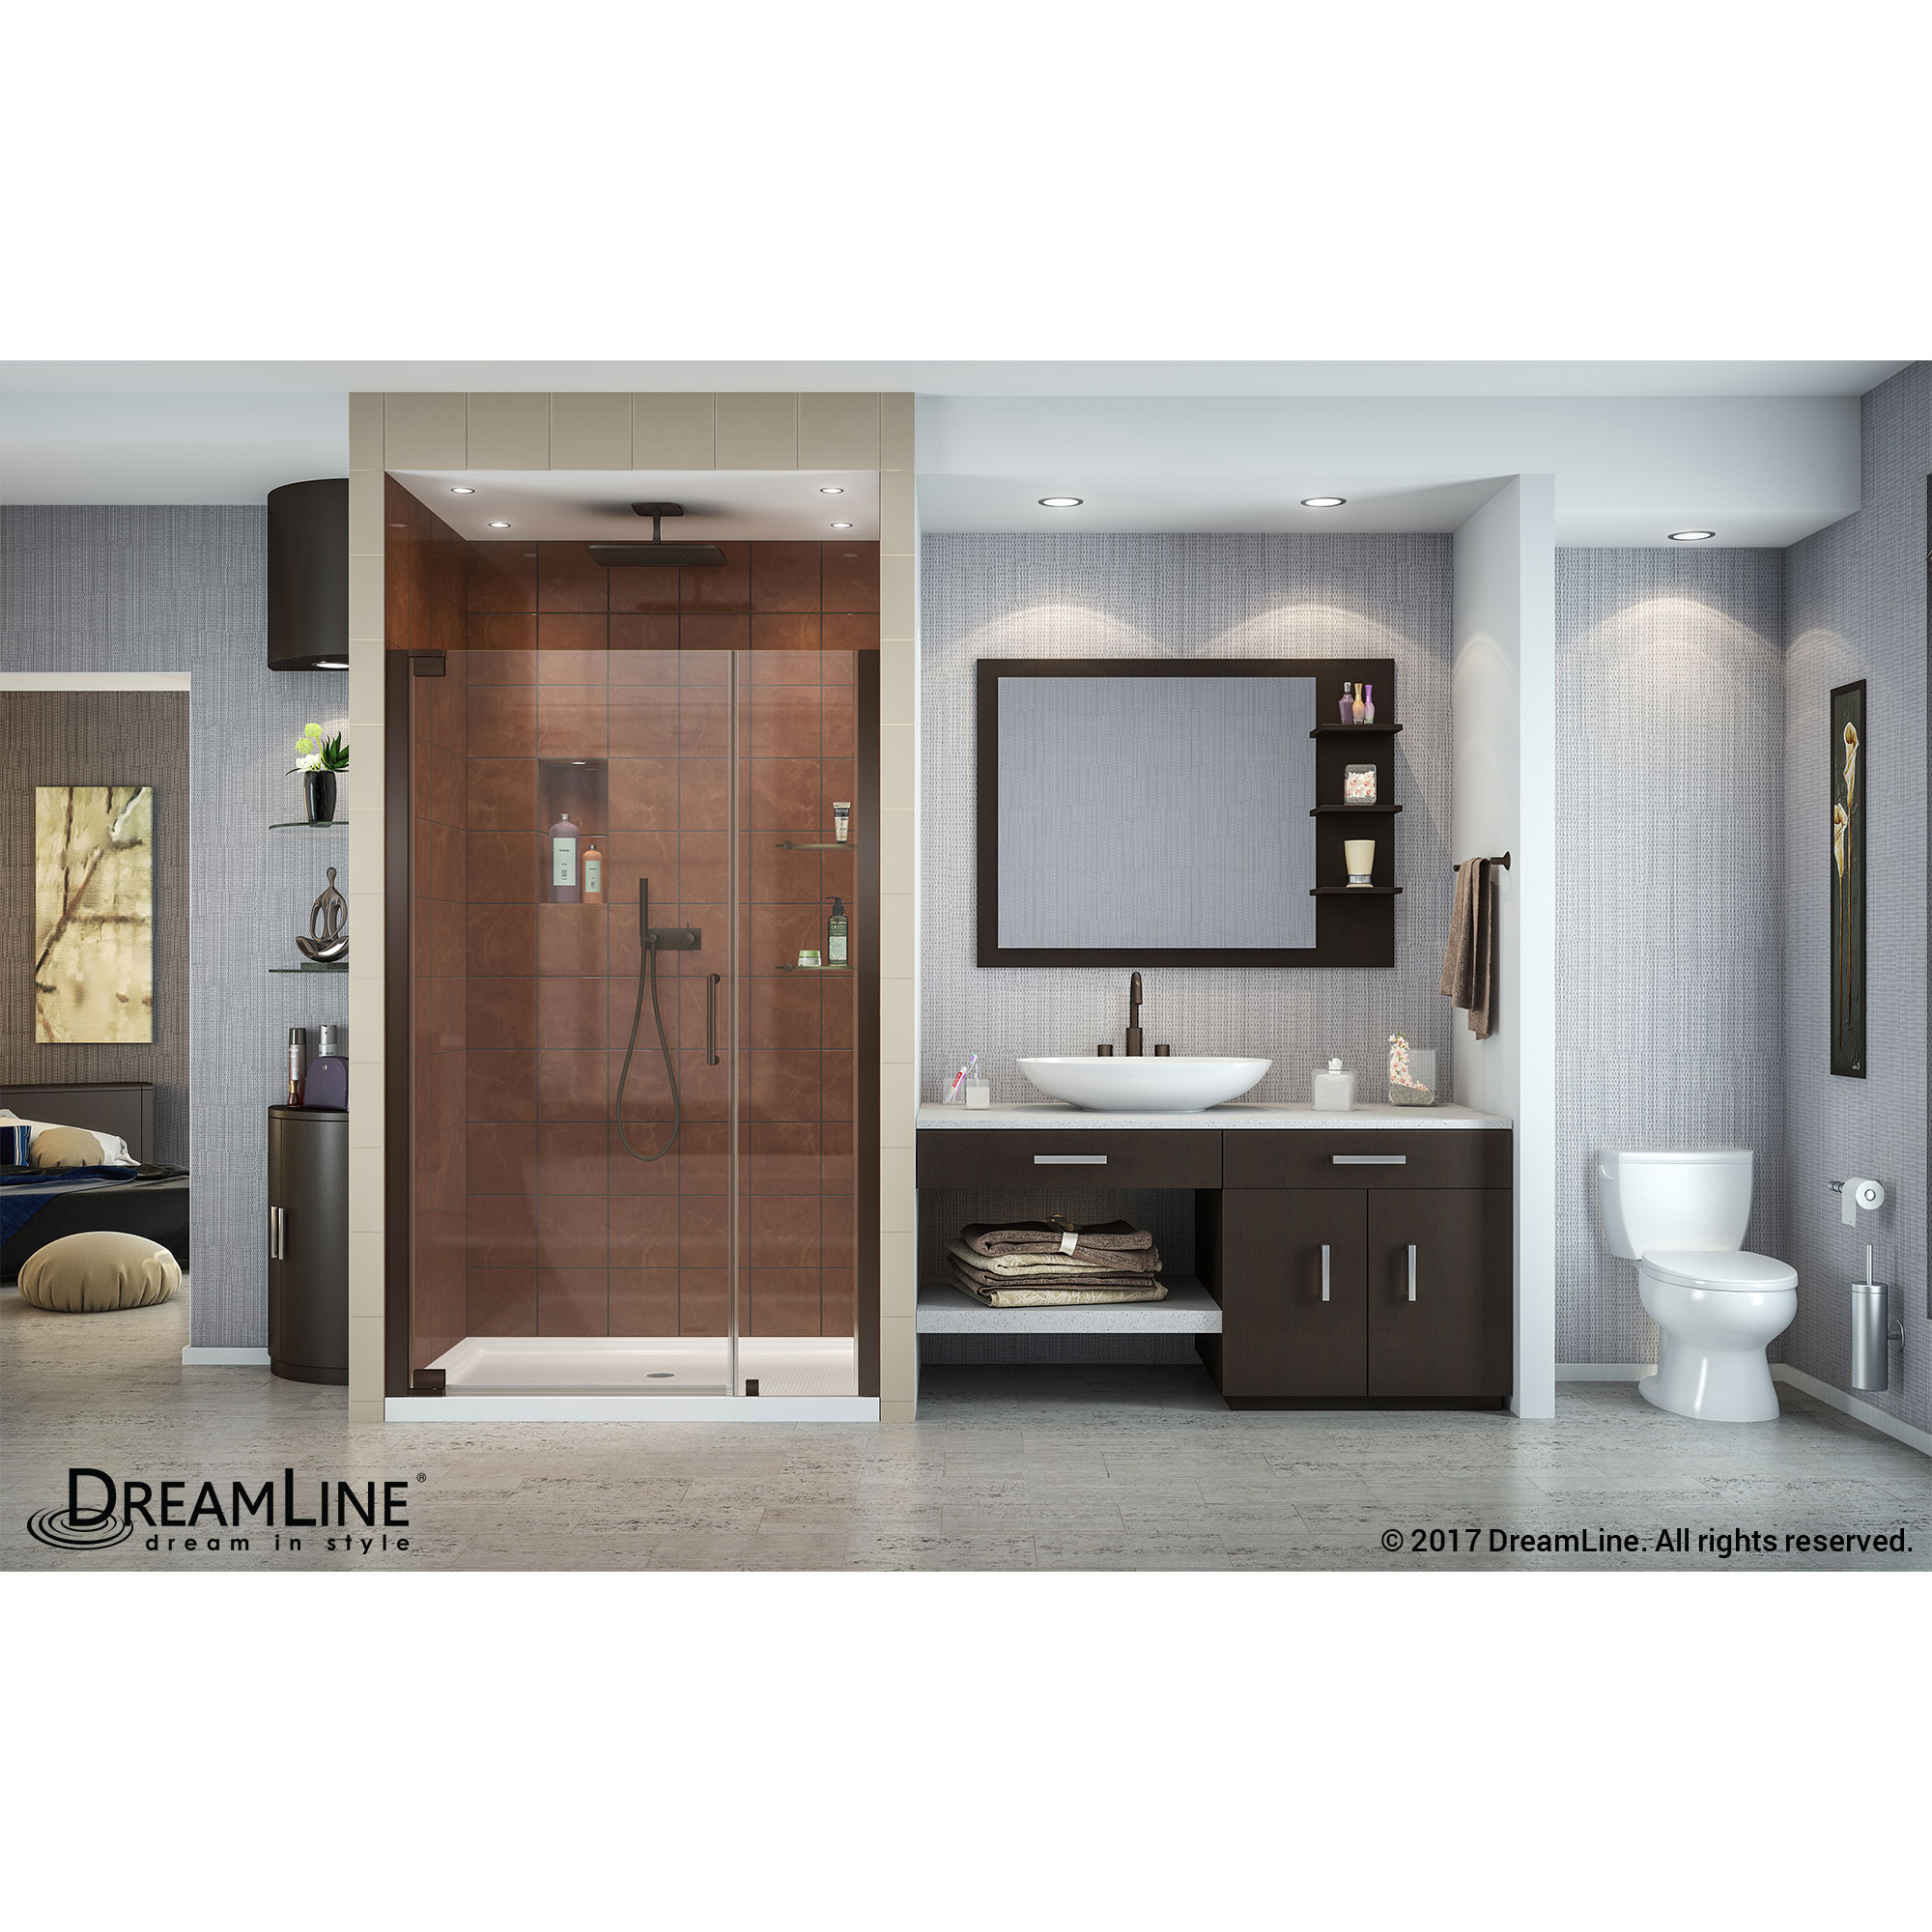 Elegance 46 to 48 in. W x 72 in. H Pivot Shower Door, Oil Rubbed Bronze Finish